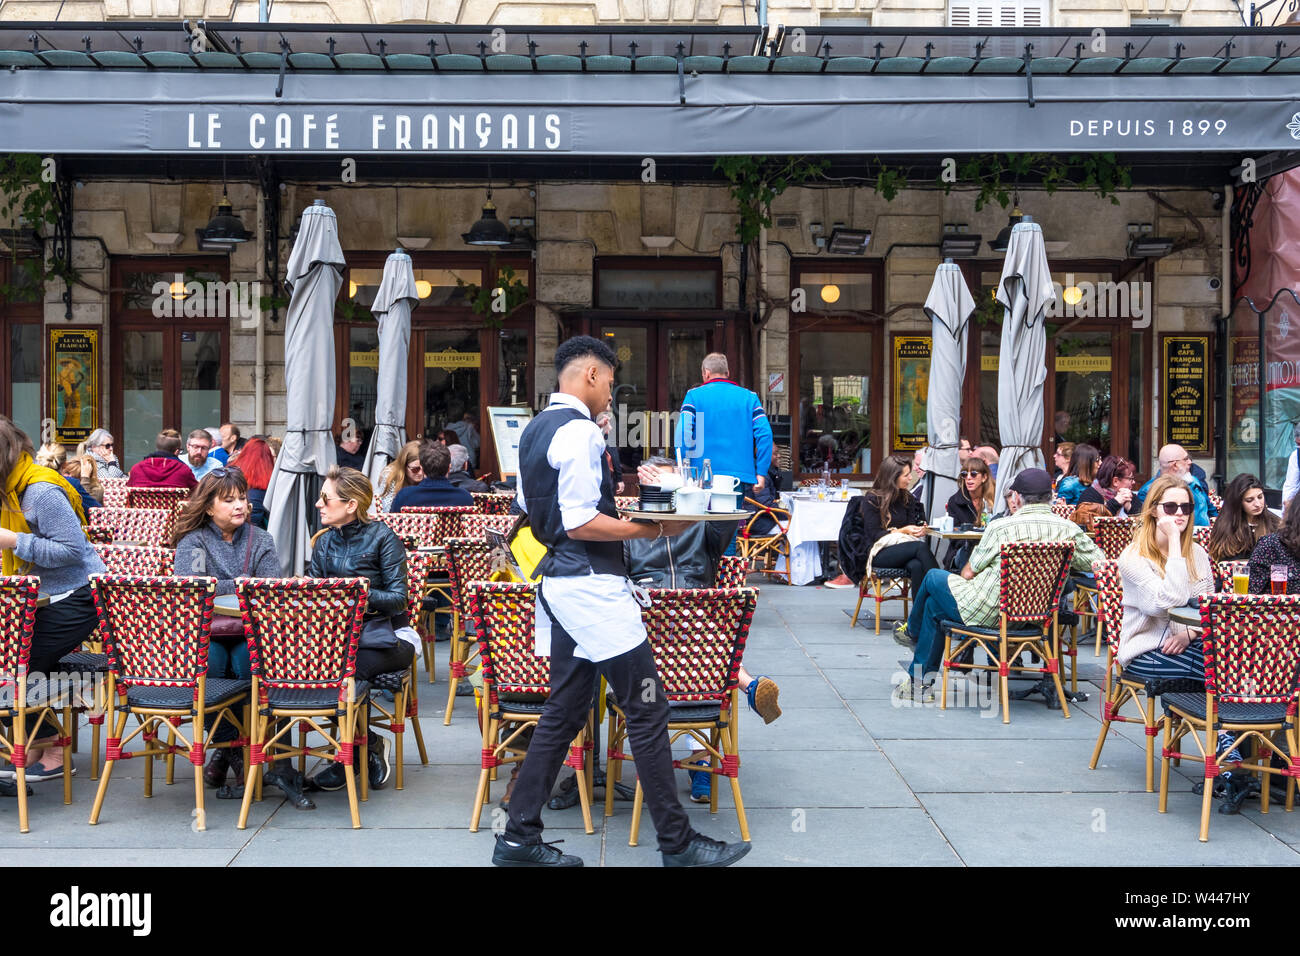 Bordeaux, France - May 5, 2019: A people relax in Cafe Francais on Place Pey Berland in Bordeaux, Aquitaine, France Stock Photo